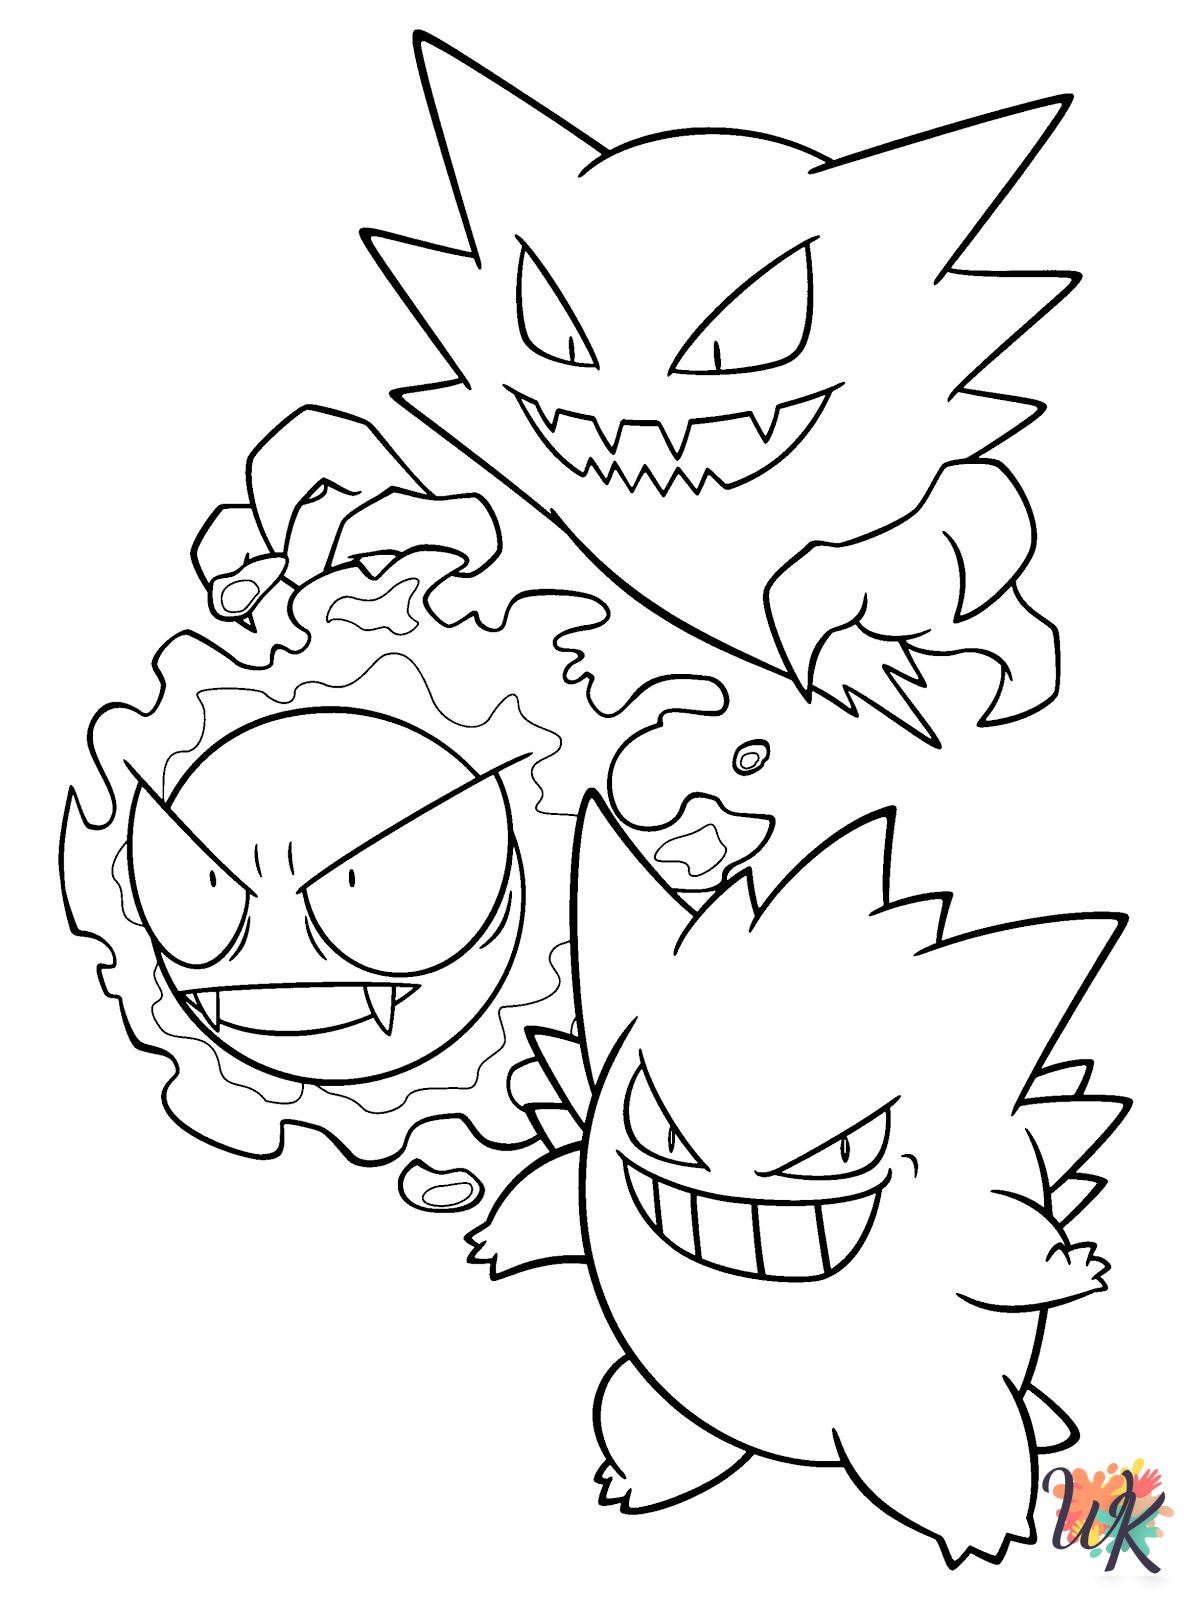 Gengar coloring pages free